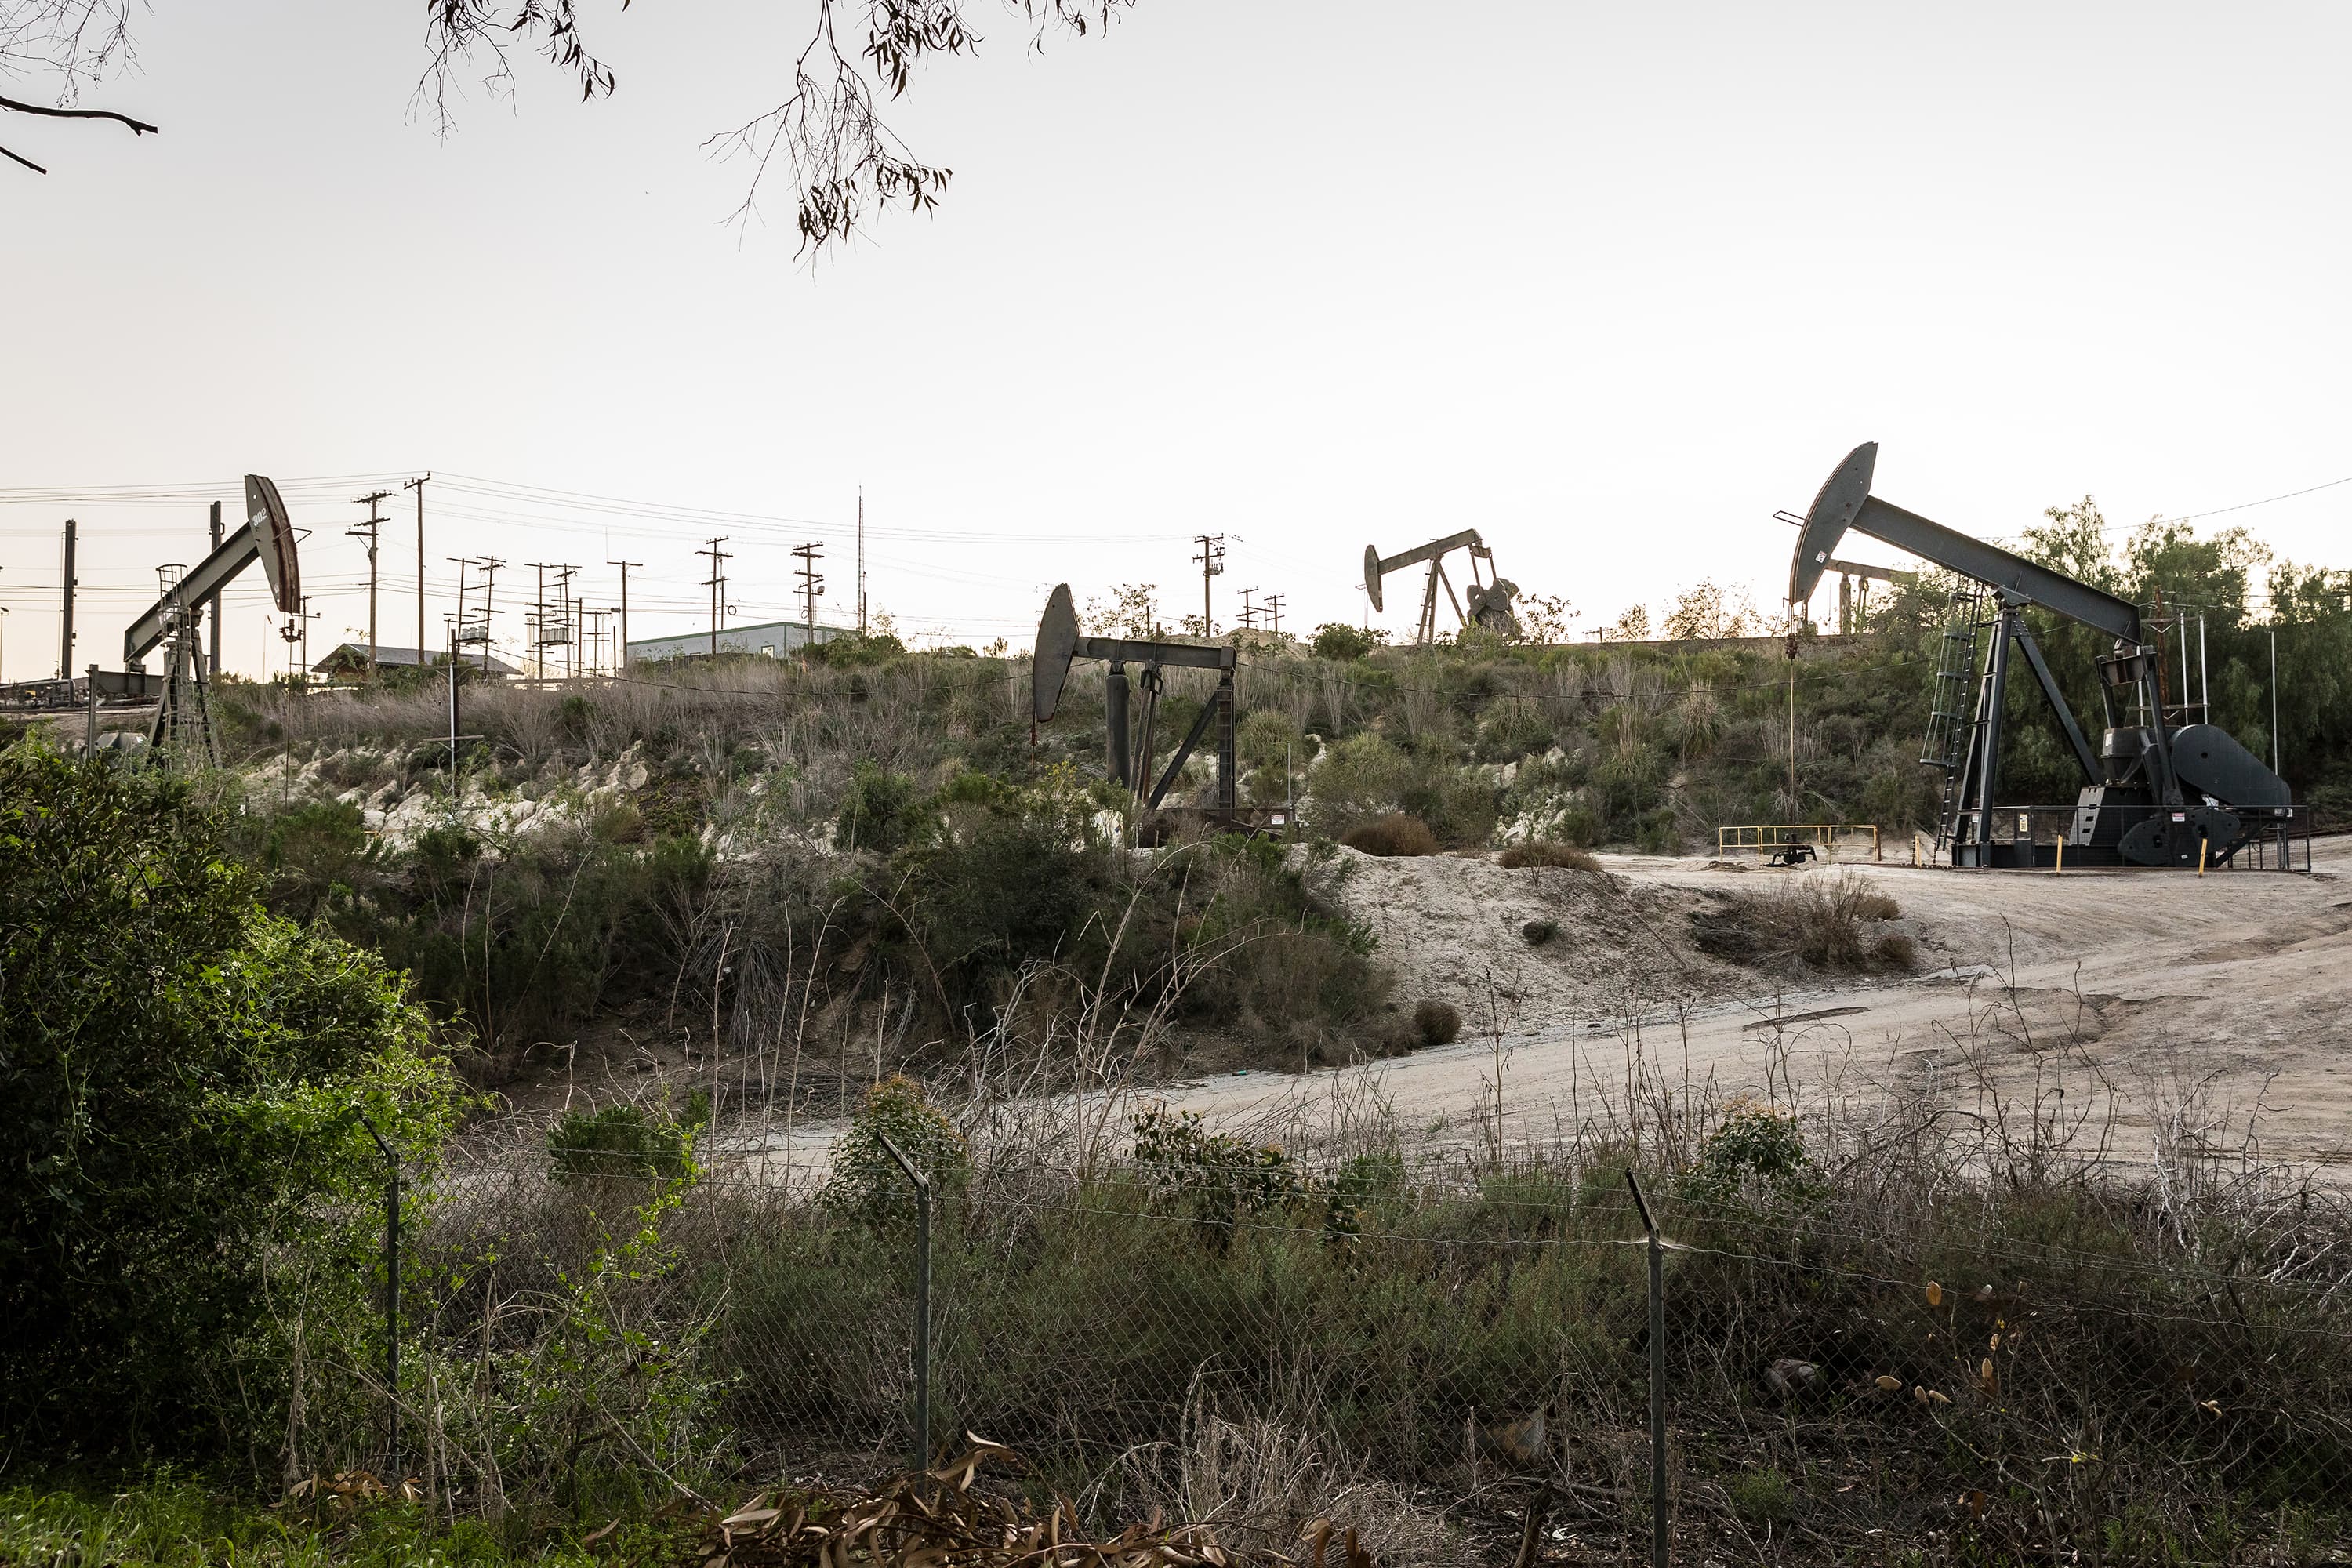 Oil wells in Los Angeles, California (Tamara Leigh Photography for the Goldman Environmental Prize)